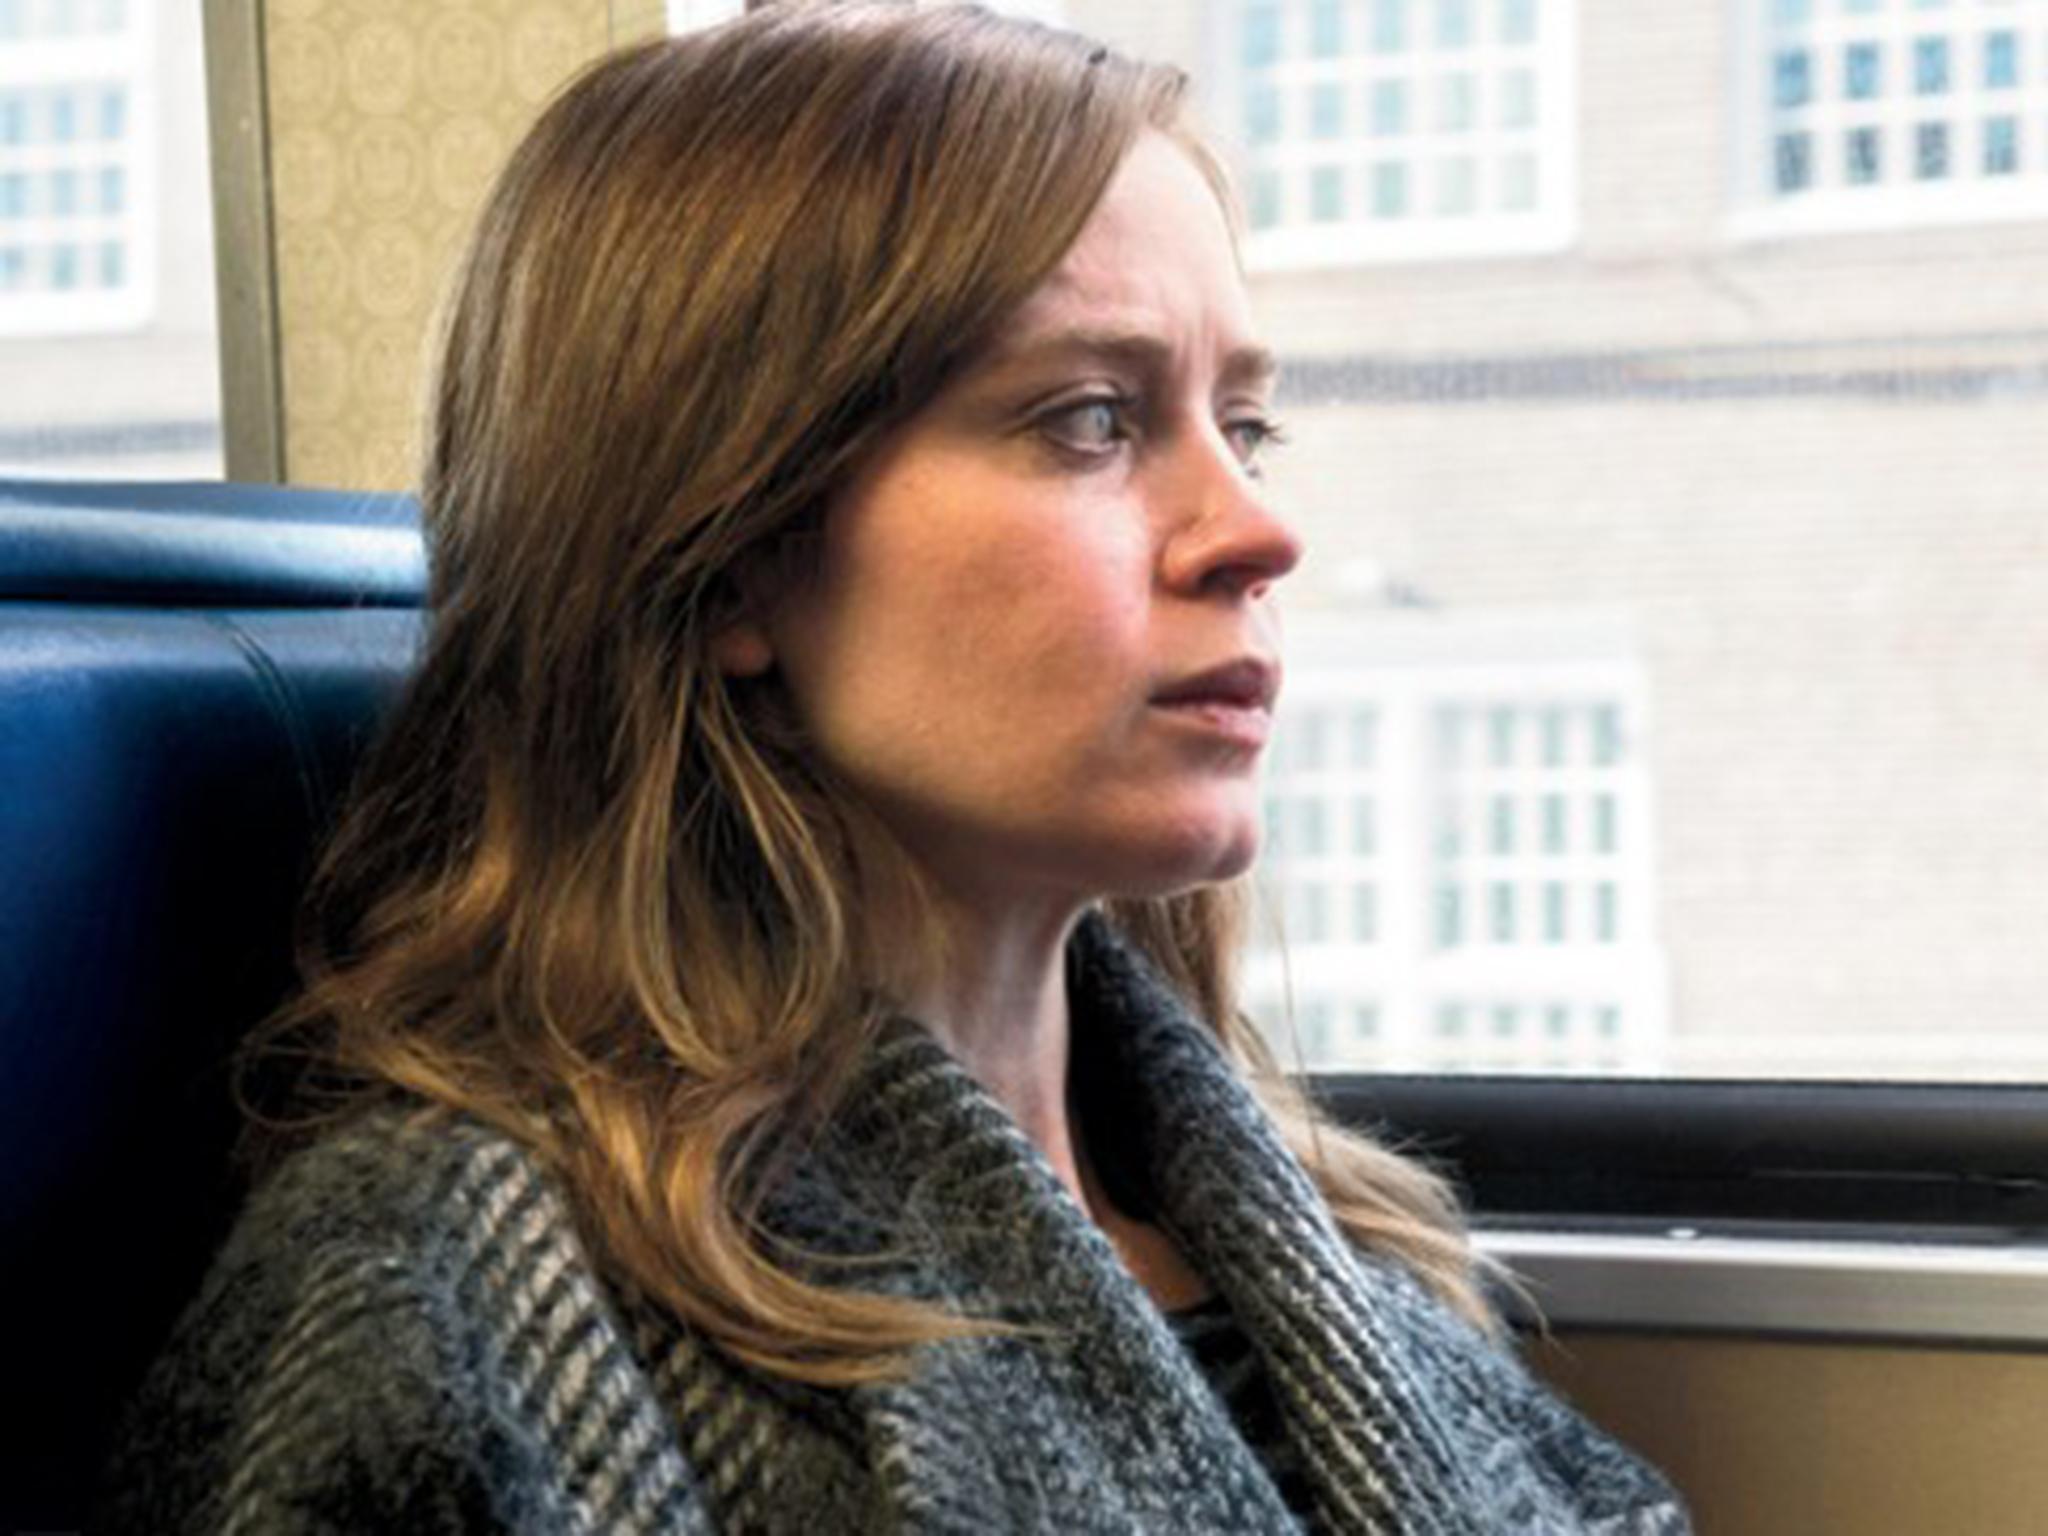 Emily Blunt stars in the thriller that hits theatres this month